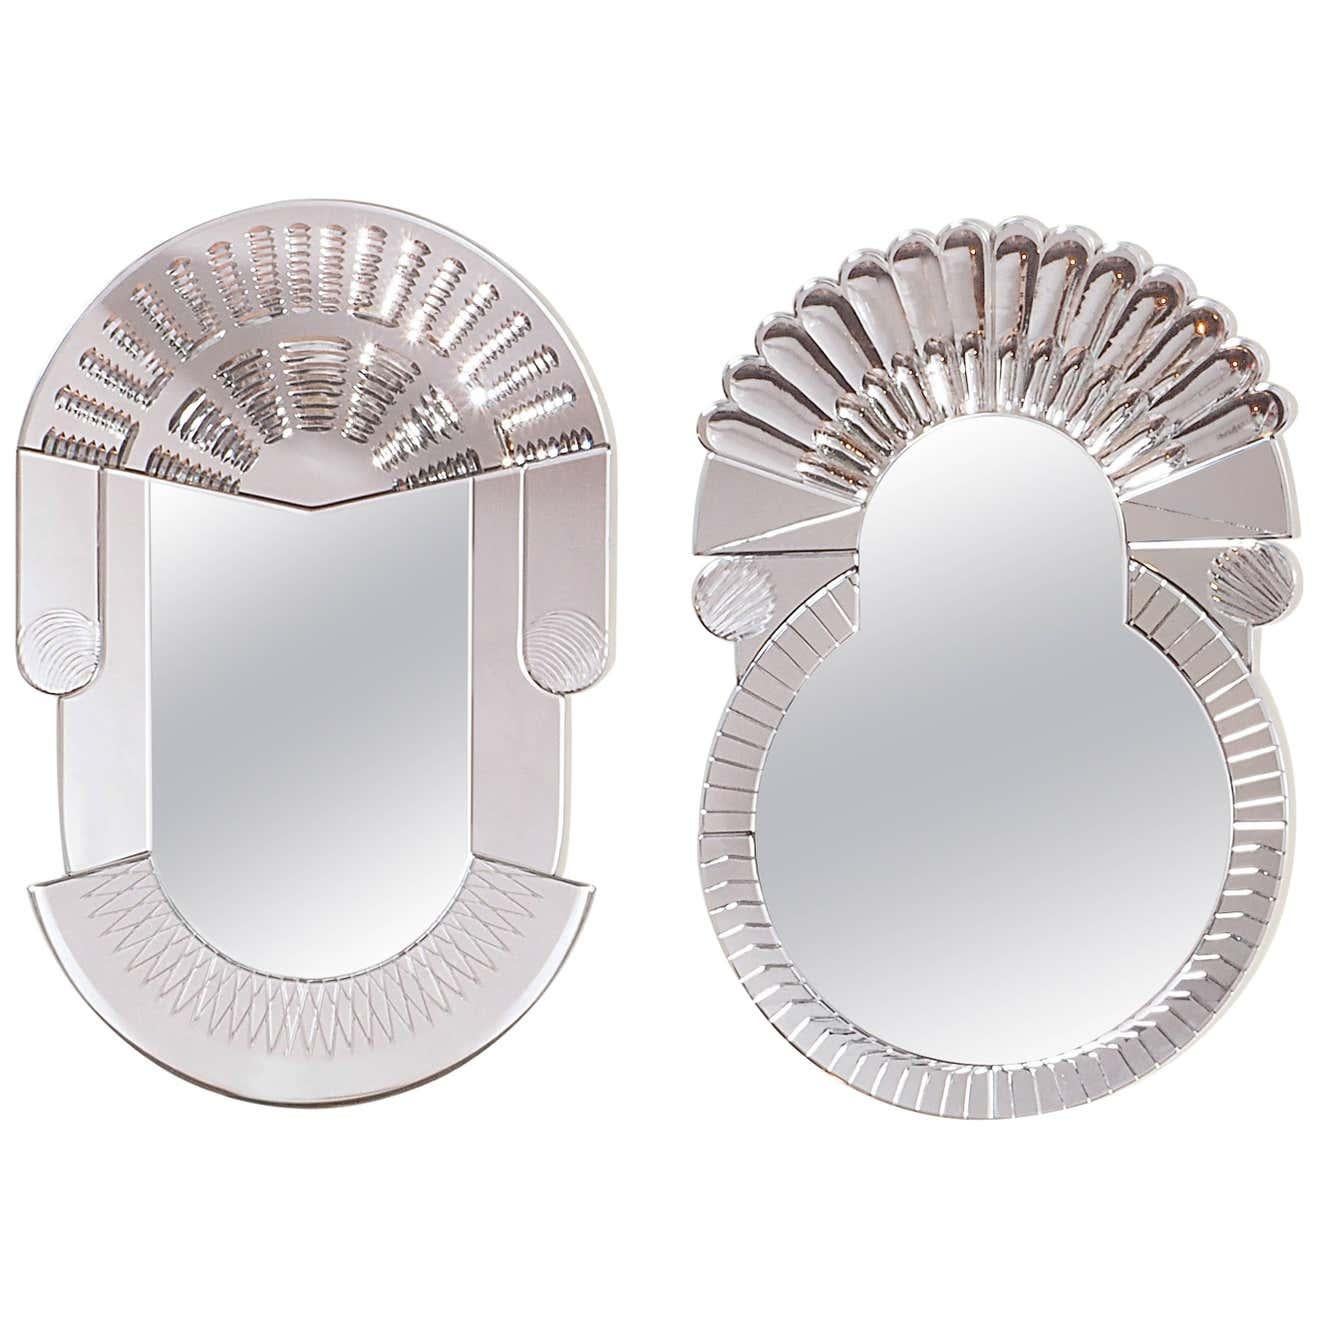 Set of 2 Small Scena Murano Mirrors by Nikolai Kotlarczyk 
Dimensions: 
Olympic: D 1 x W 30 x H 45 cm 
Rotonda: D 1 x W 30 x H 45 cm 
Materials: silvered carved glass, golden carved polished steel. Nembro marble (base).
Also available in different